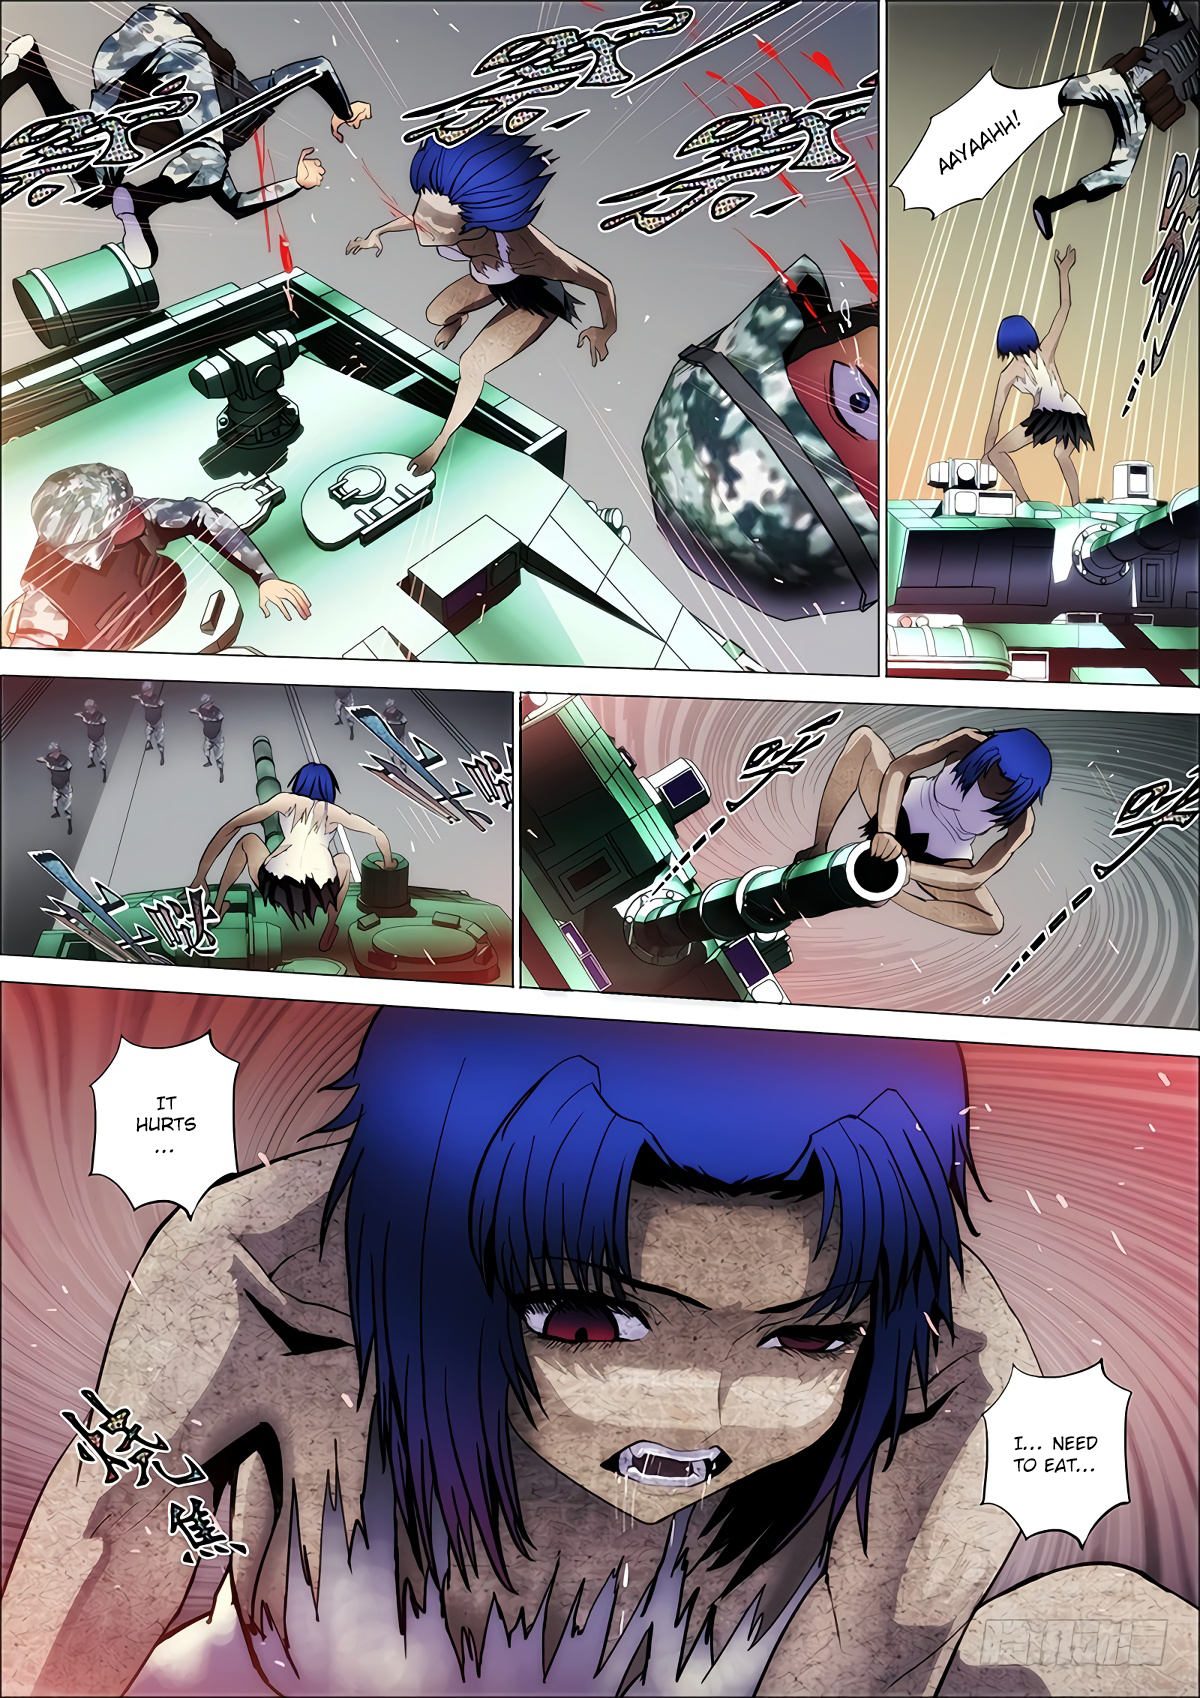 Killing Ghosts - Page 1